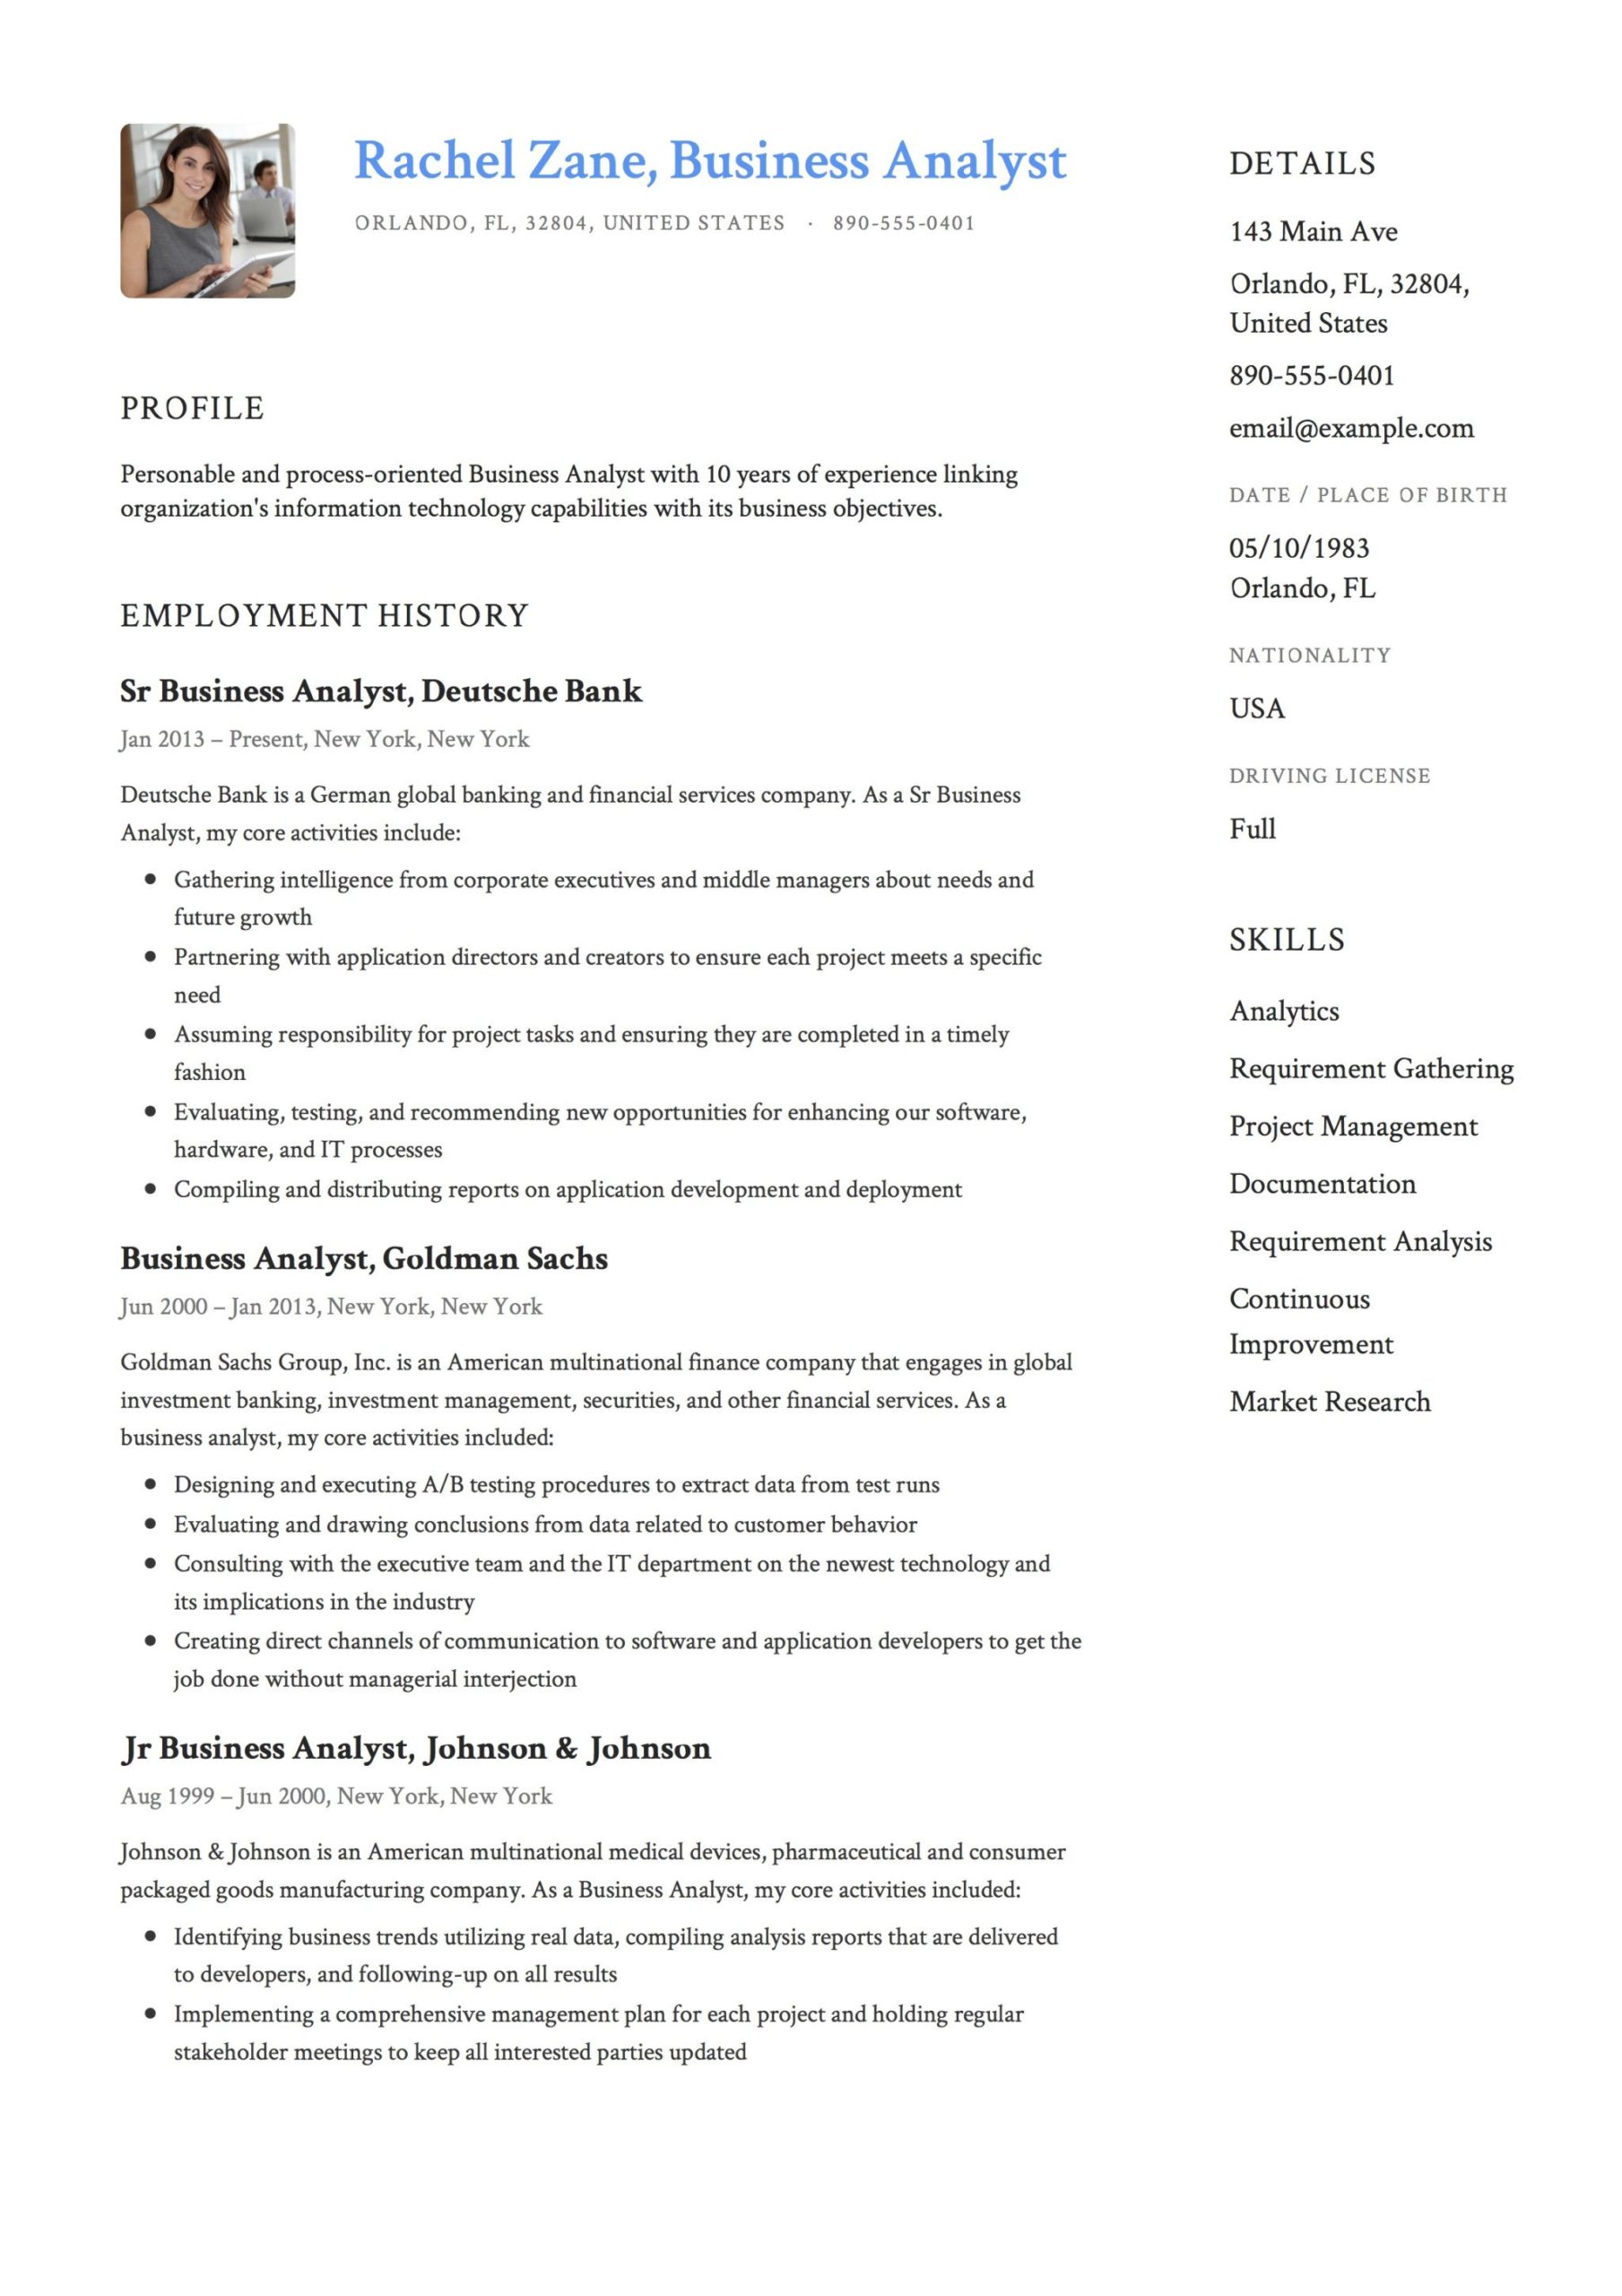 Resume Samples for Business System Analyst Business Analyst Resume Examples & Writing Guide 2022